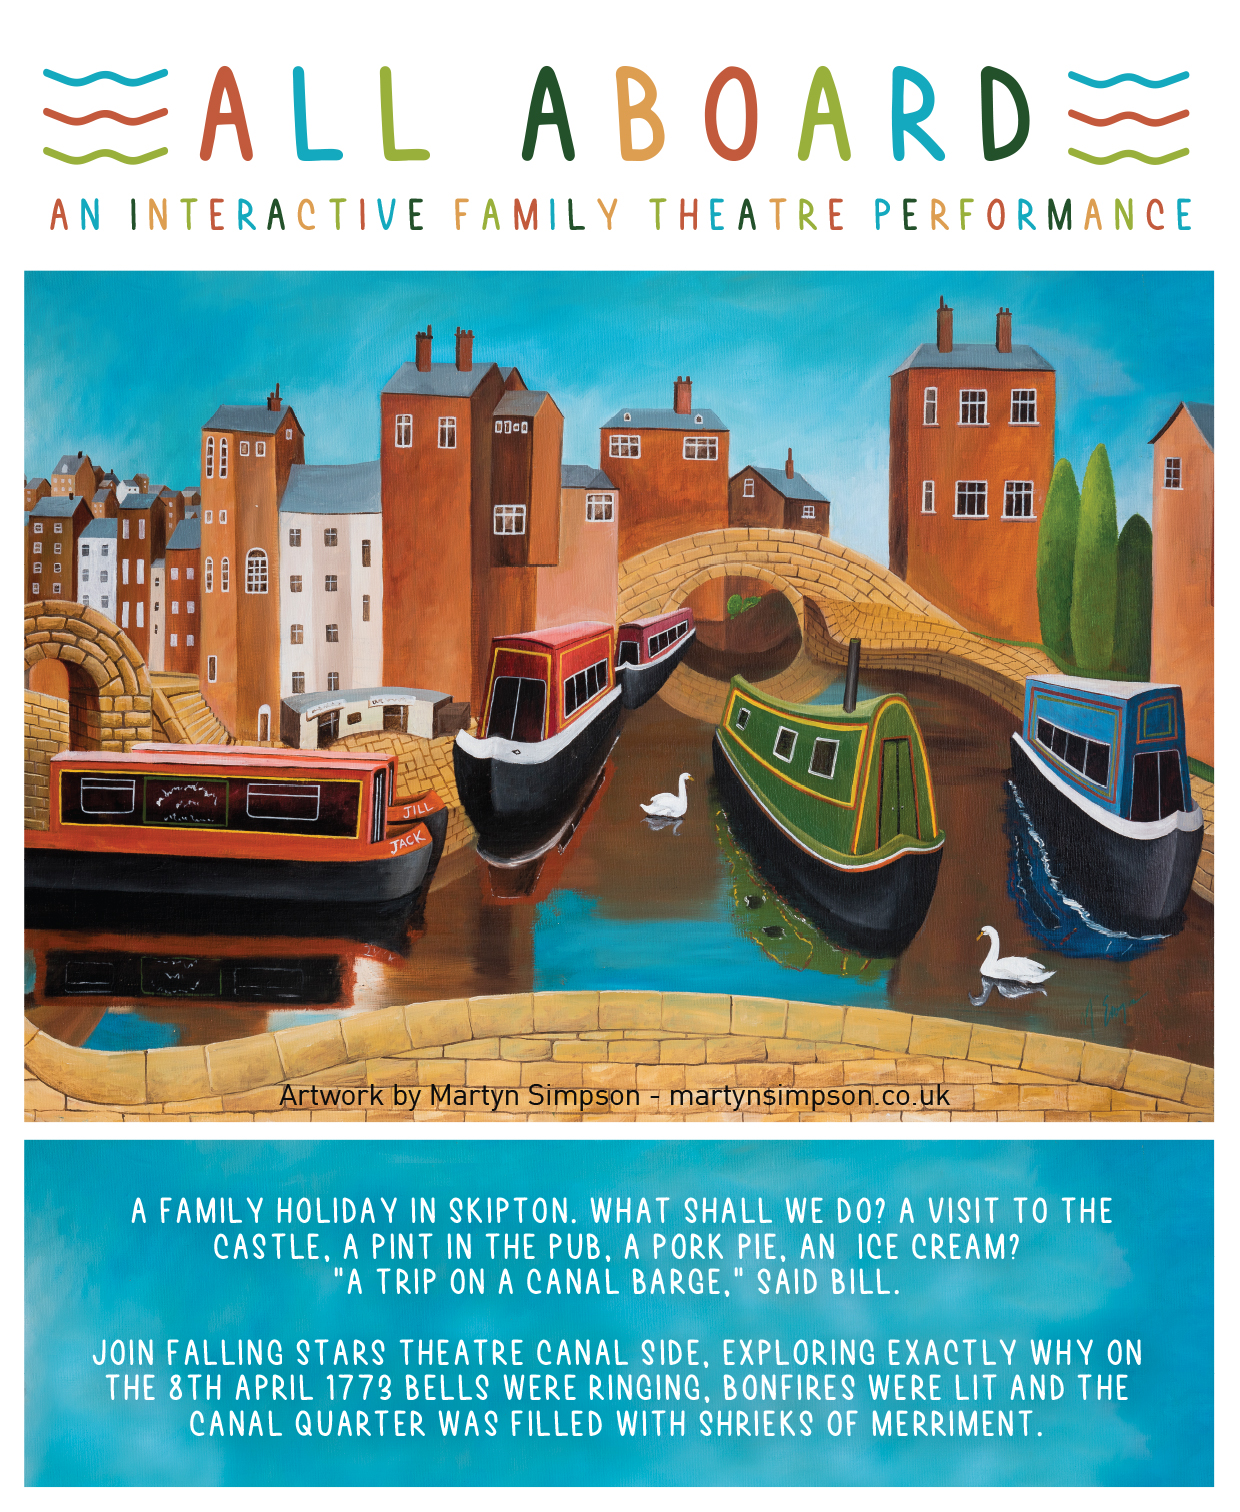 All Aboard Theatre Performance Poster - Join Falling Stars Theatre canal side, exploring exactly why on 8th April 1773 bells were ringing bonfires were lit and the canal quarter was filled with shrieks of merriment. A family holiday in Skipton, what shall we do? A visit to the castle, a pint in the pub, a pork pie, and ice cream? “A trip on the canal barge” said Bill. All Aboard, exploring the history of the Leeds/Liverpool canal in true Falling Stars Theatre style. Expect audience interaction, lots of fun and some very serious characters!